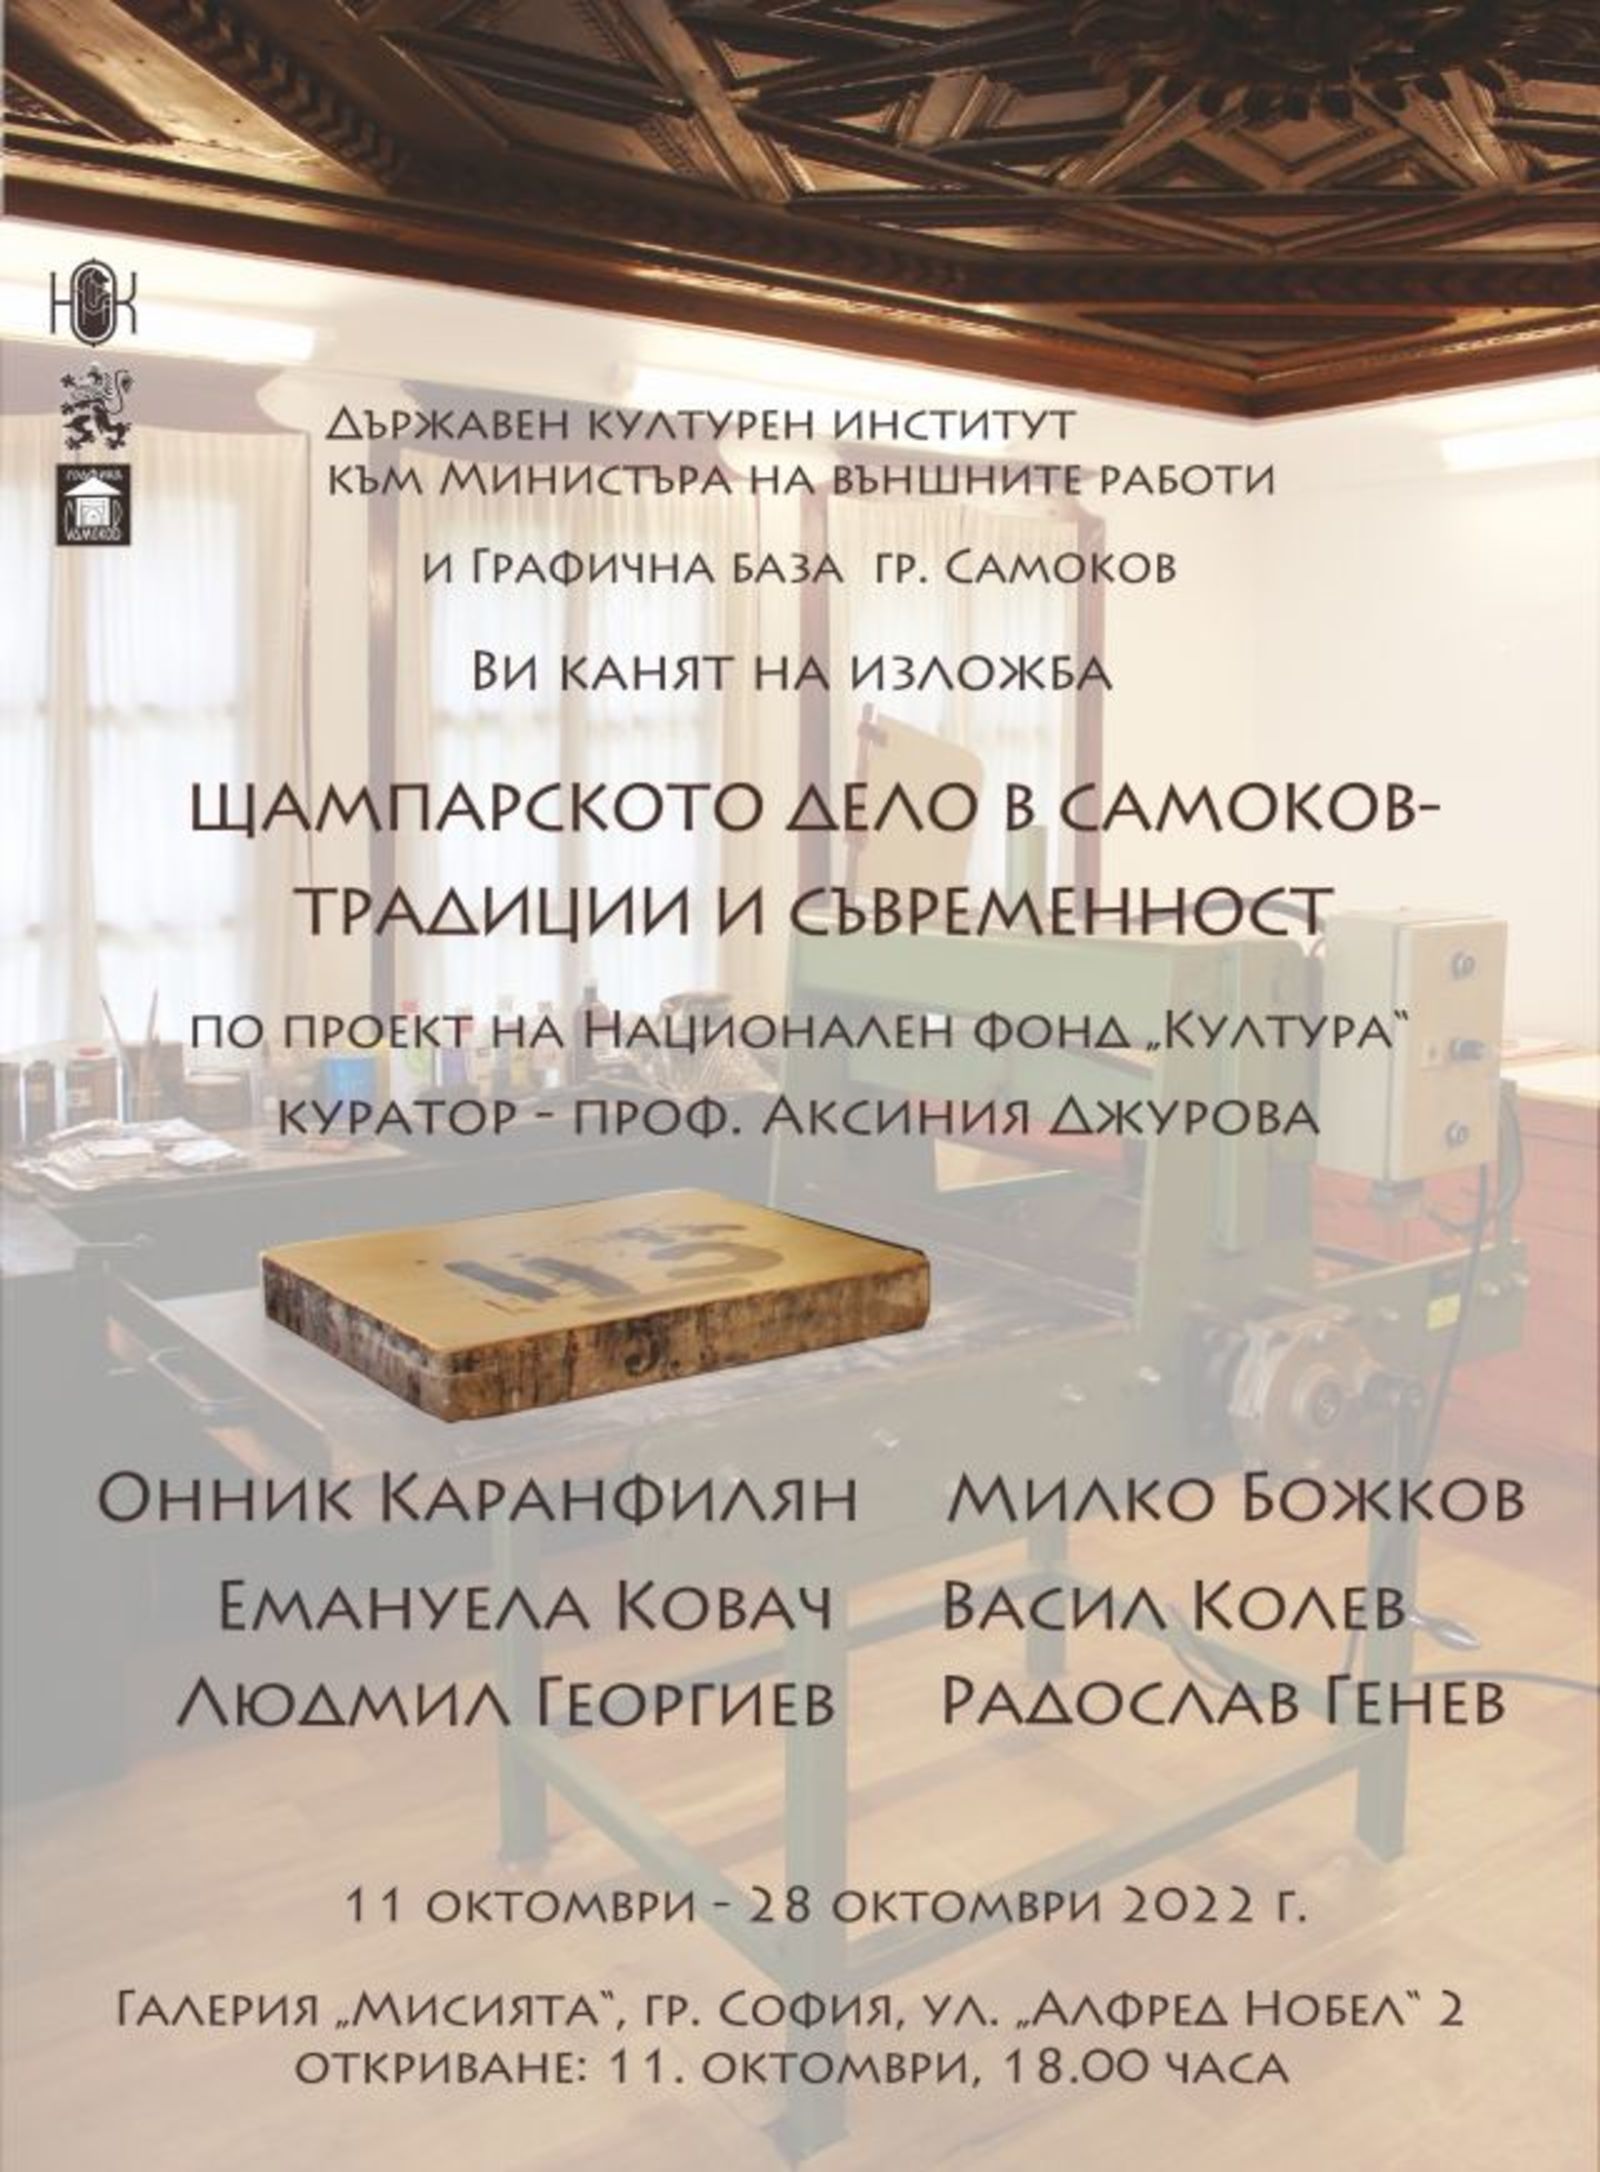 The exhibition "Printmaking in Samokov - Tradition and Modernity" Opens at the "Mission" Gallery